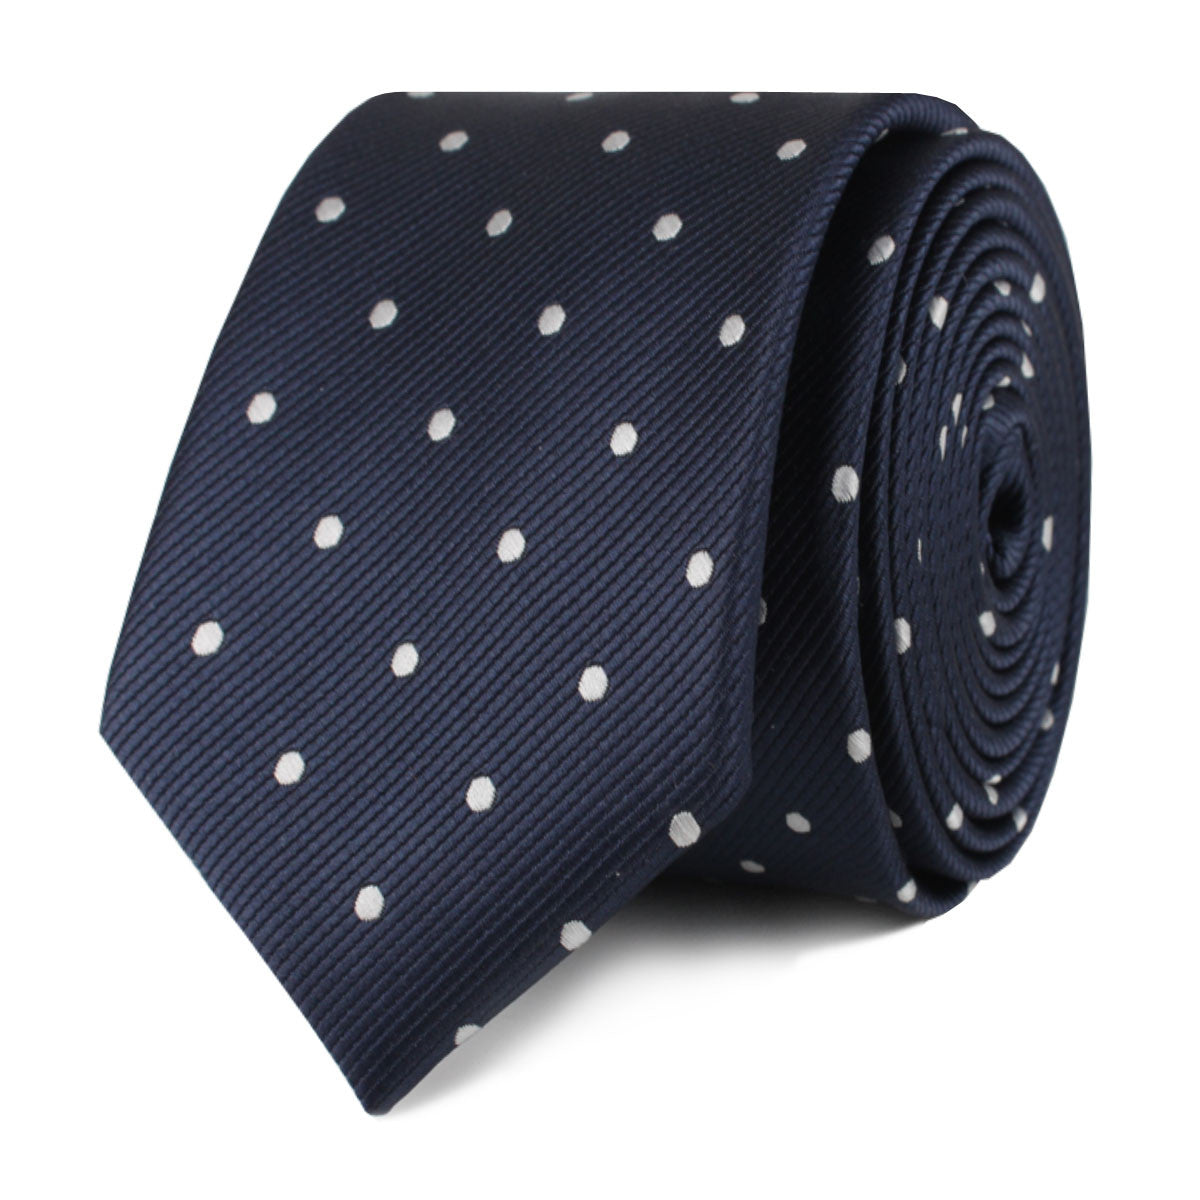 Dark Midnight Blue with White Polka Dots Skinny Tie Front Roll